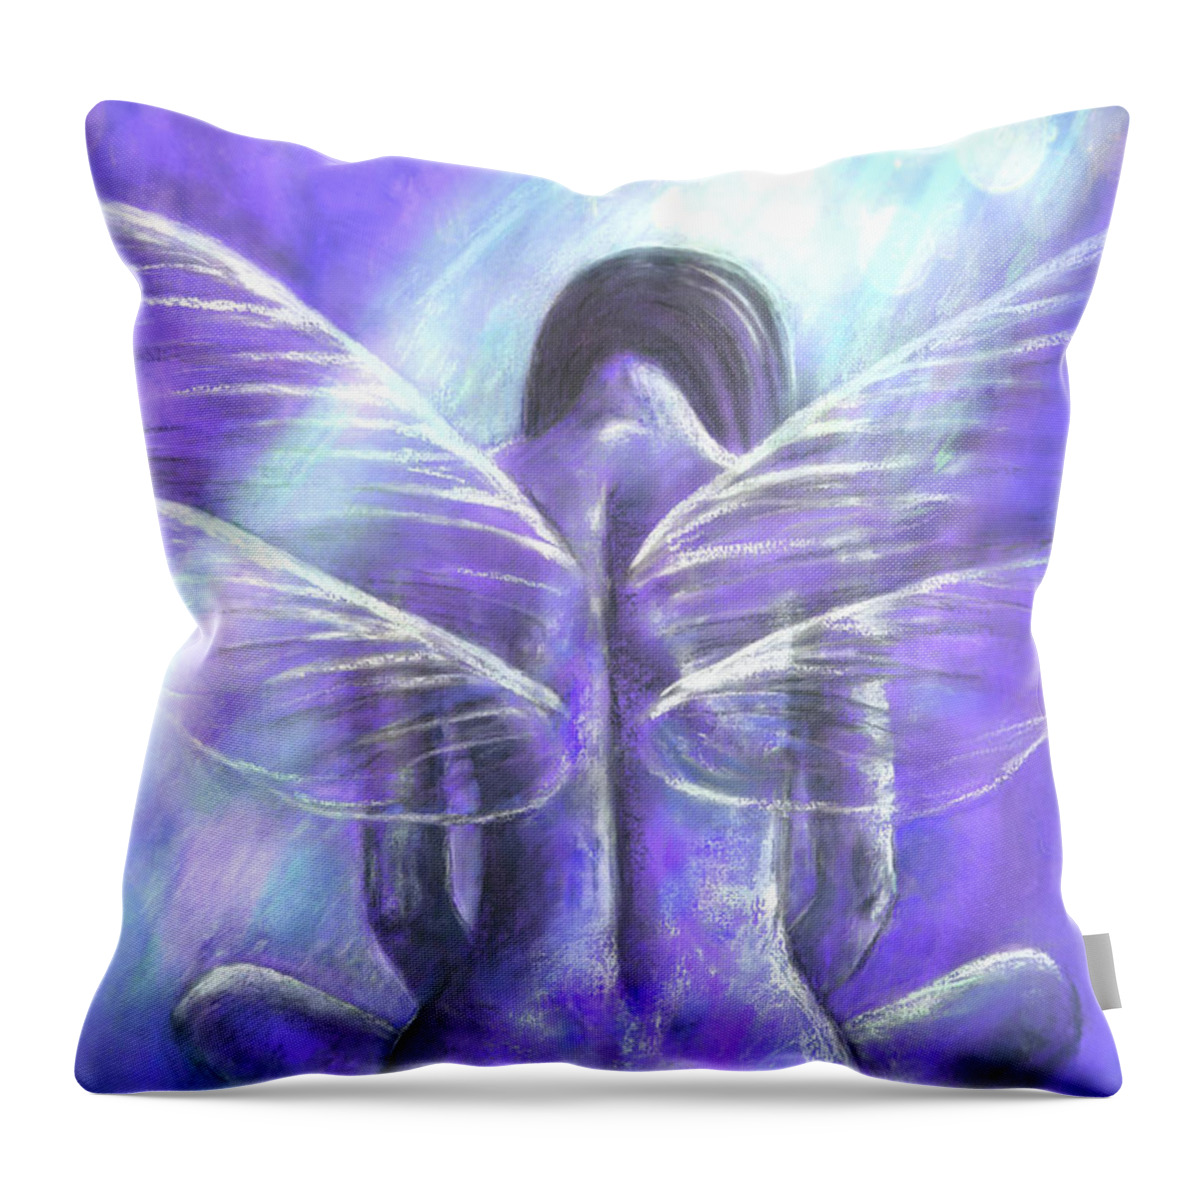 Zoe Oakley Throw Pillow featuring the mixed media As Transparency Gains Momentum by Zoe Oakley